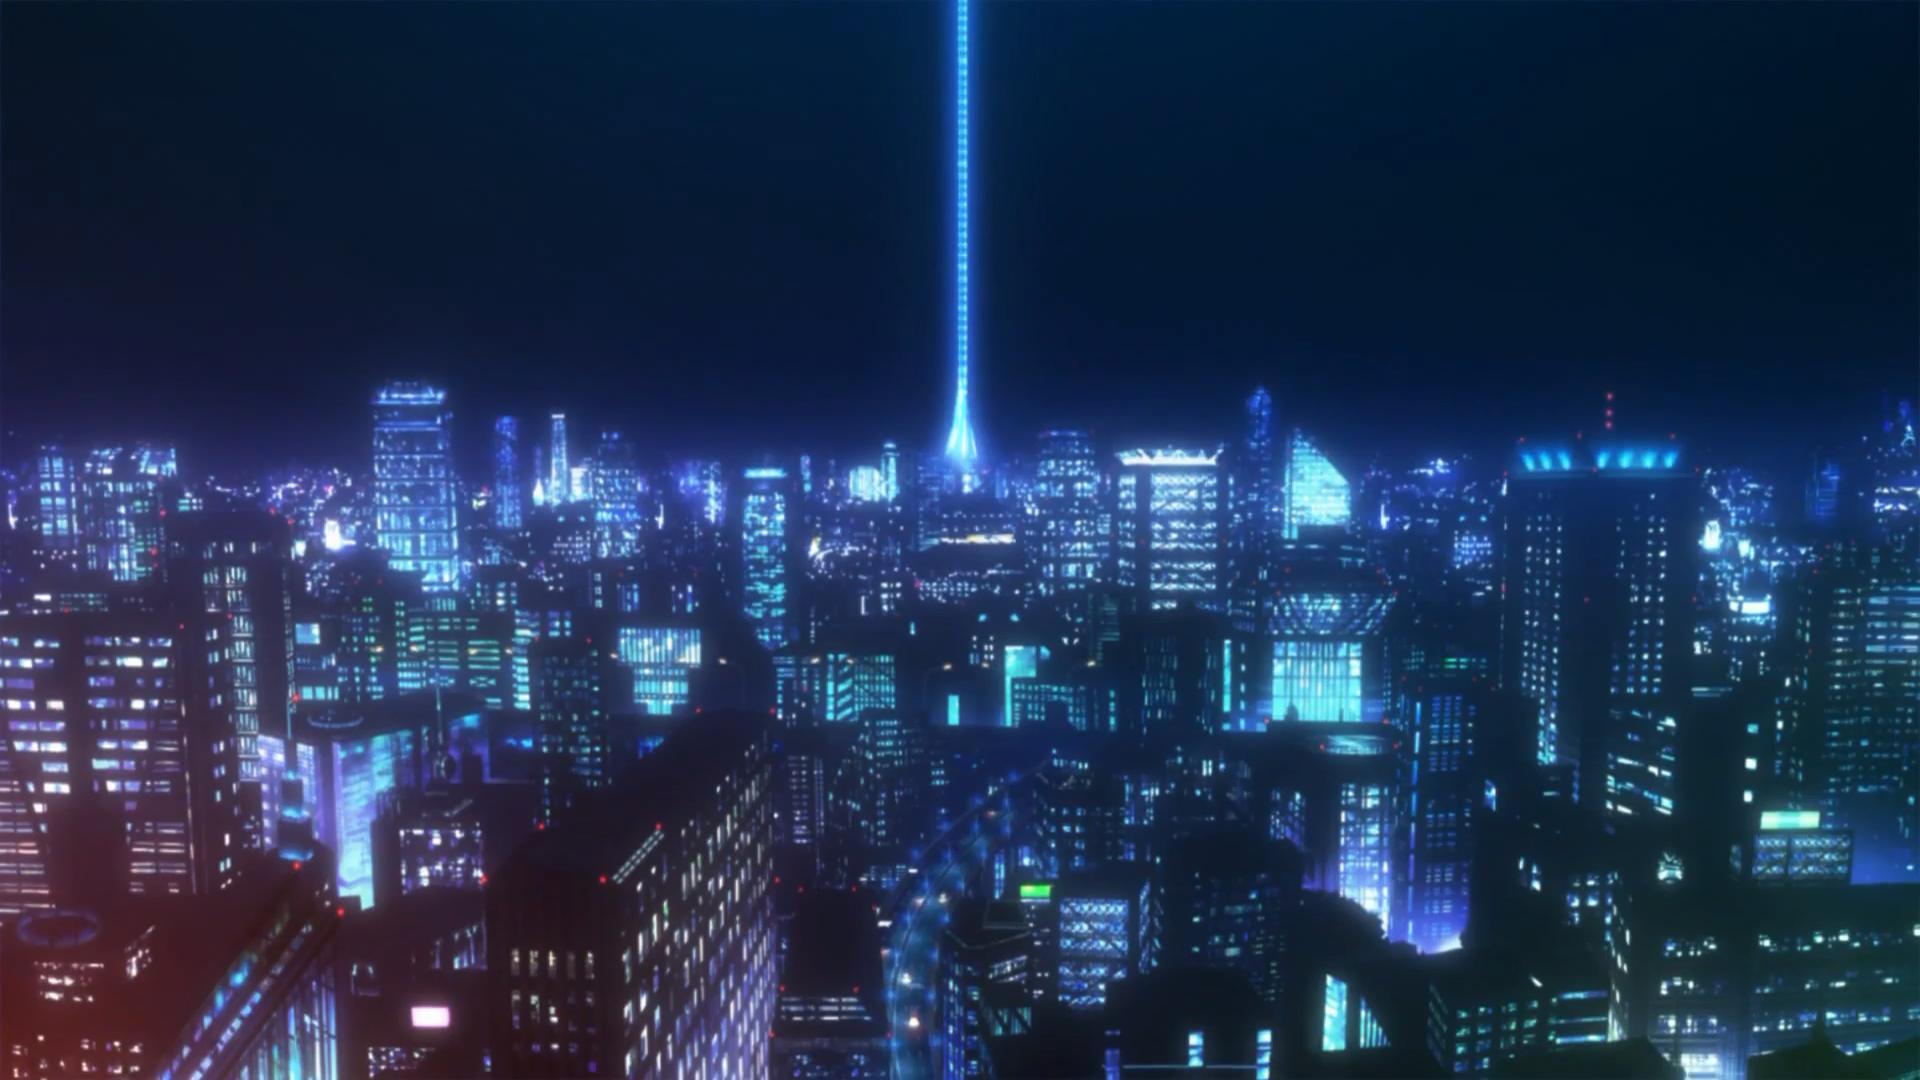 Psycho Pass City Wallpapers